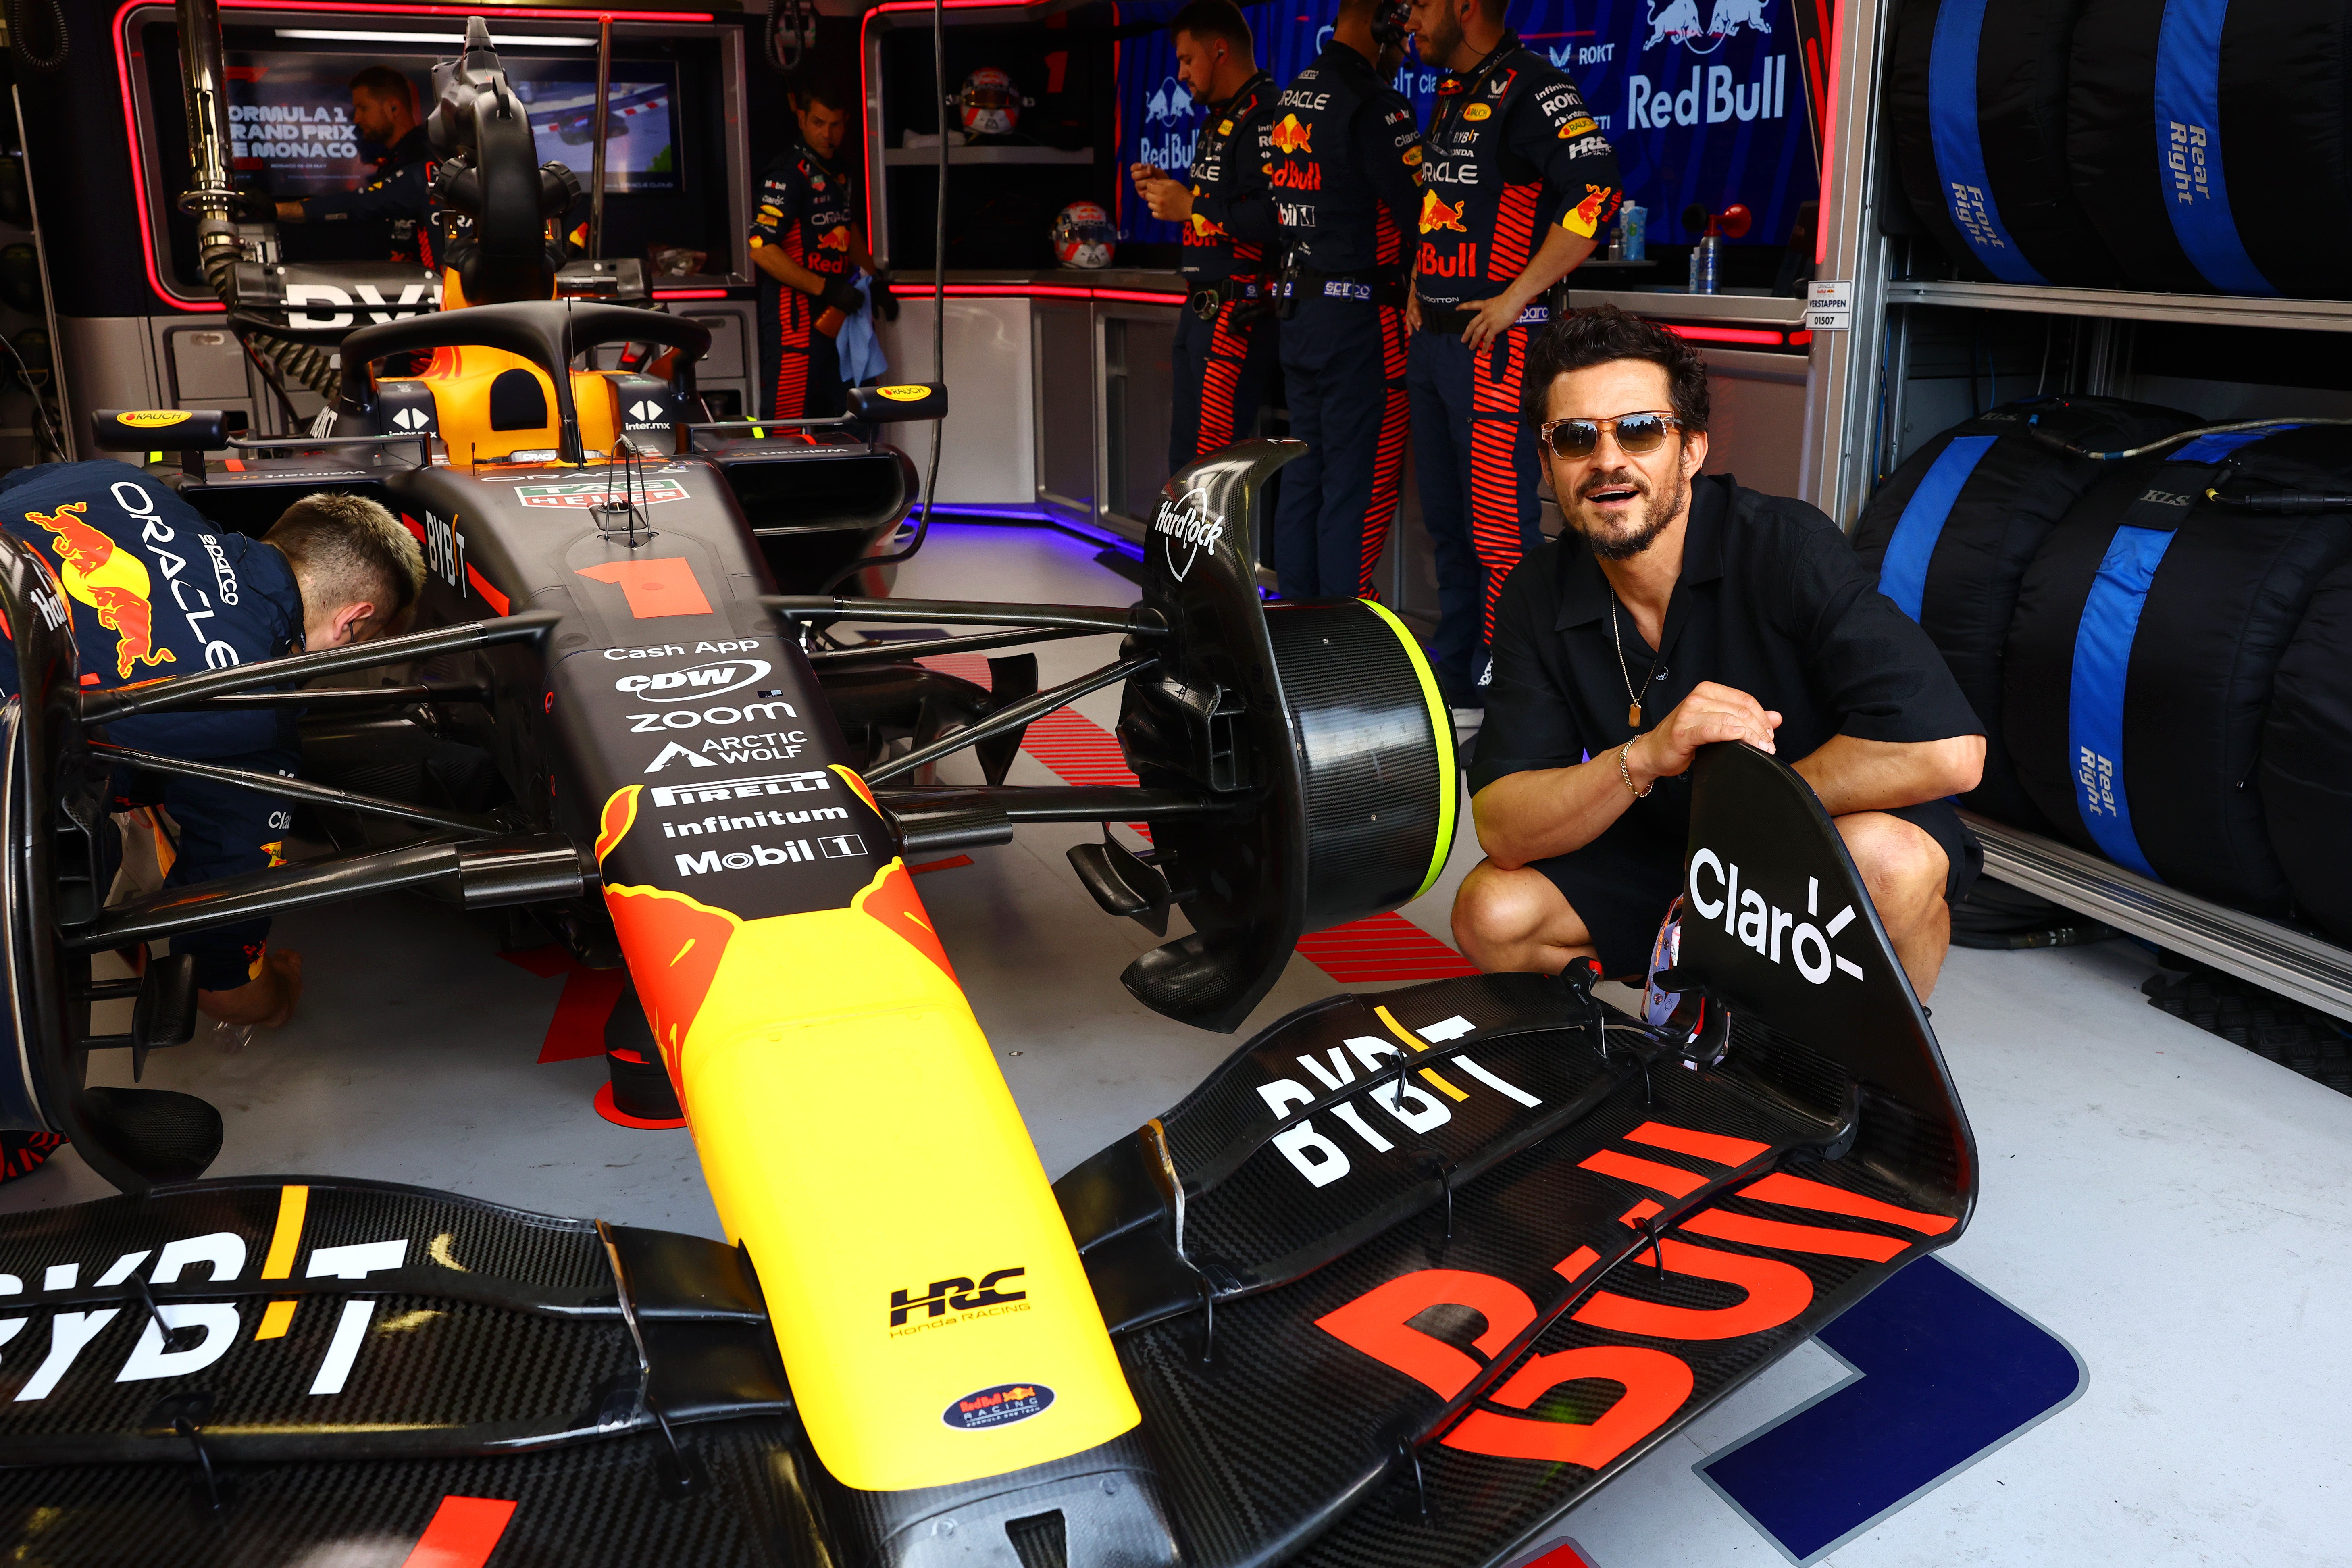 Orlando Bloom poses for a photo in the Red Bull Racing garage prior to the F1 Grand Prix of Monaco at Circuit de Monaco on May 28, 2023